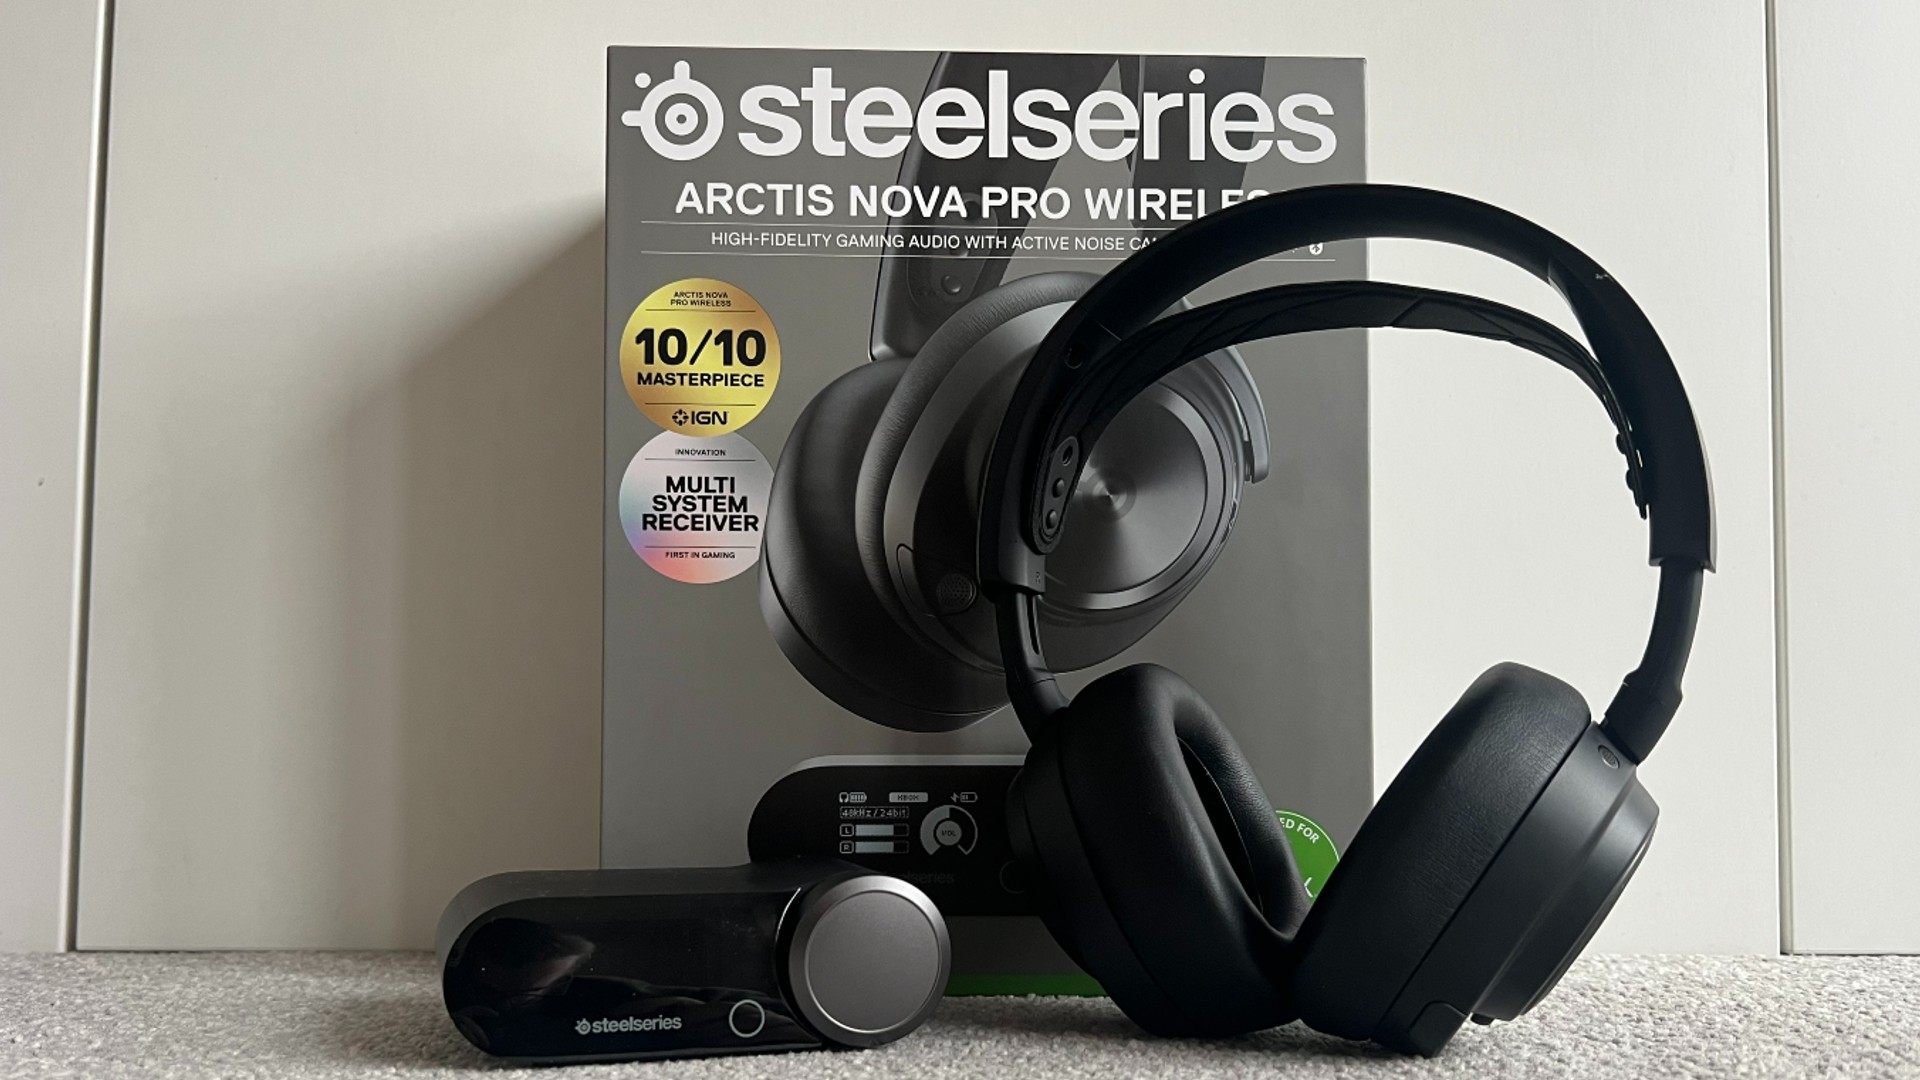 SteelSeries Arctis Nova Pro Wireless Review - The King of Gaming Headsets -  Wireless Performance & Battery Life